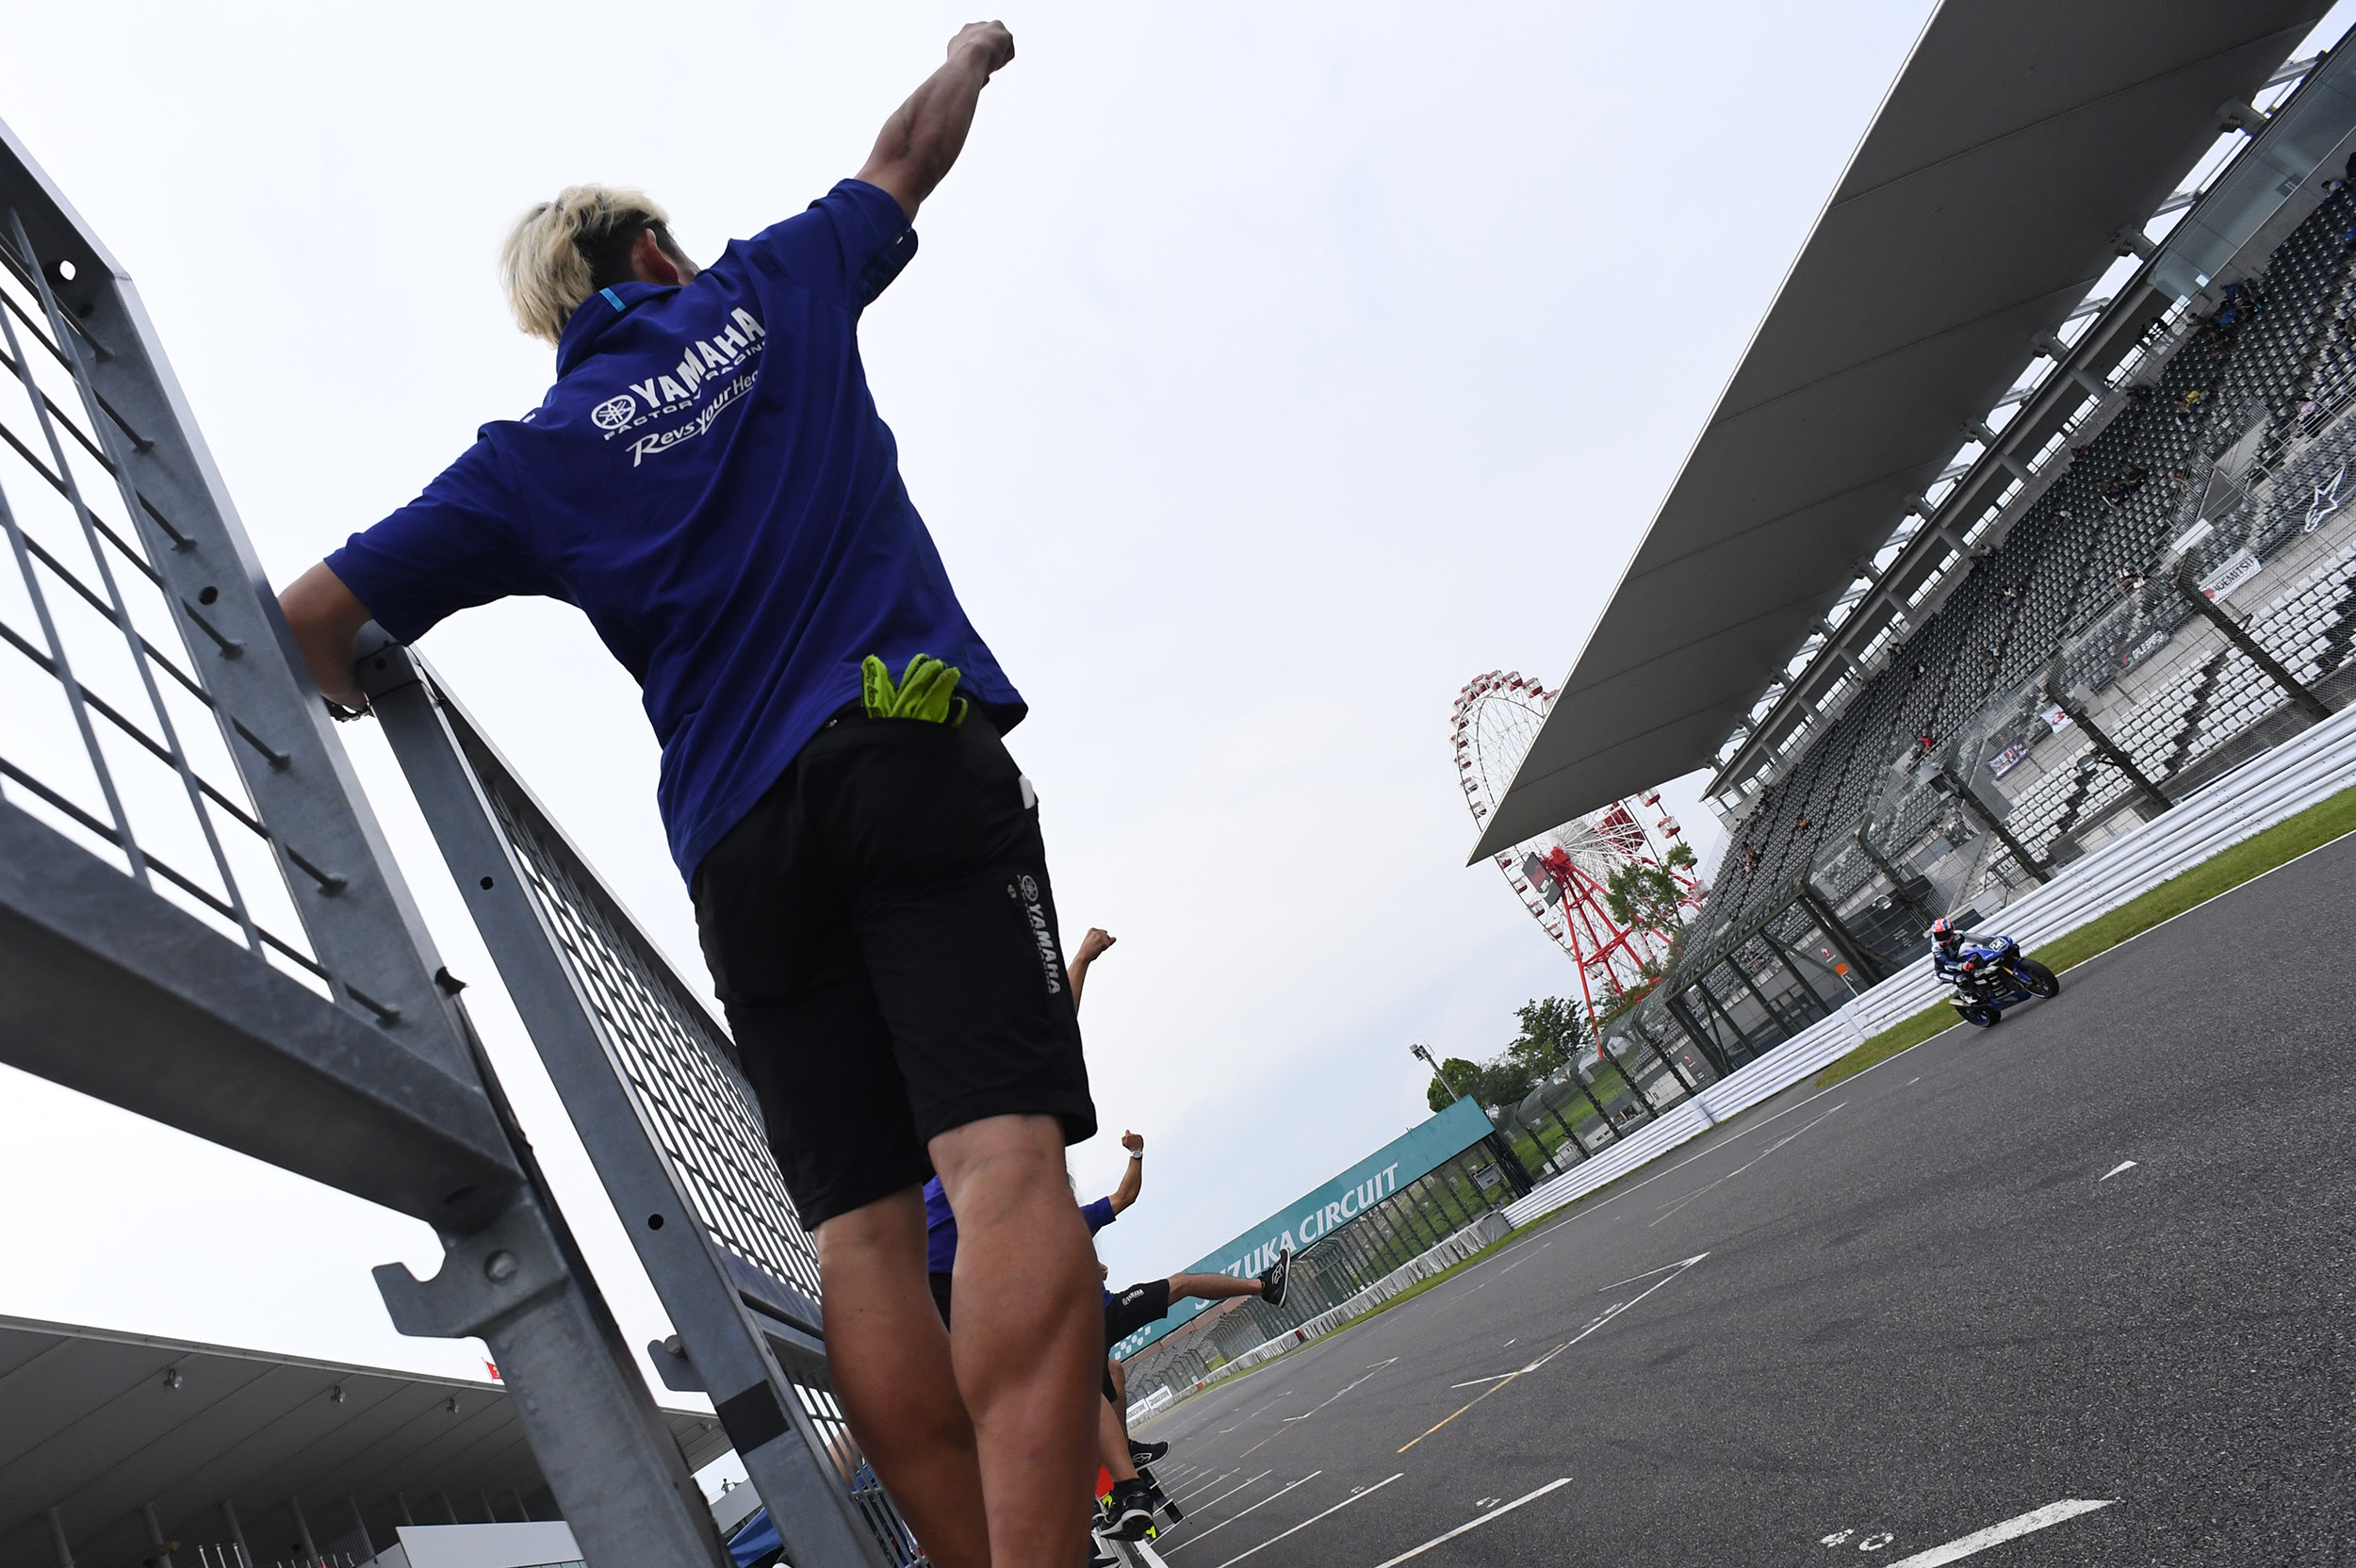 BROC PARKES DIGS IN TO TAKE RACE ONE AT SUZUKA